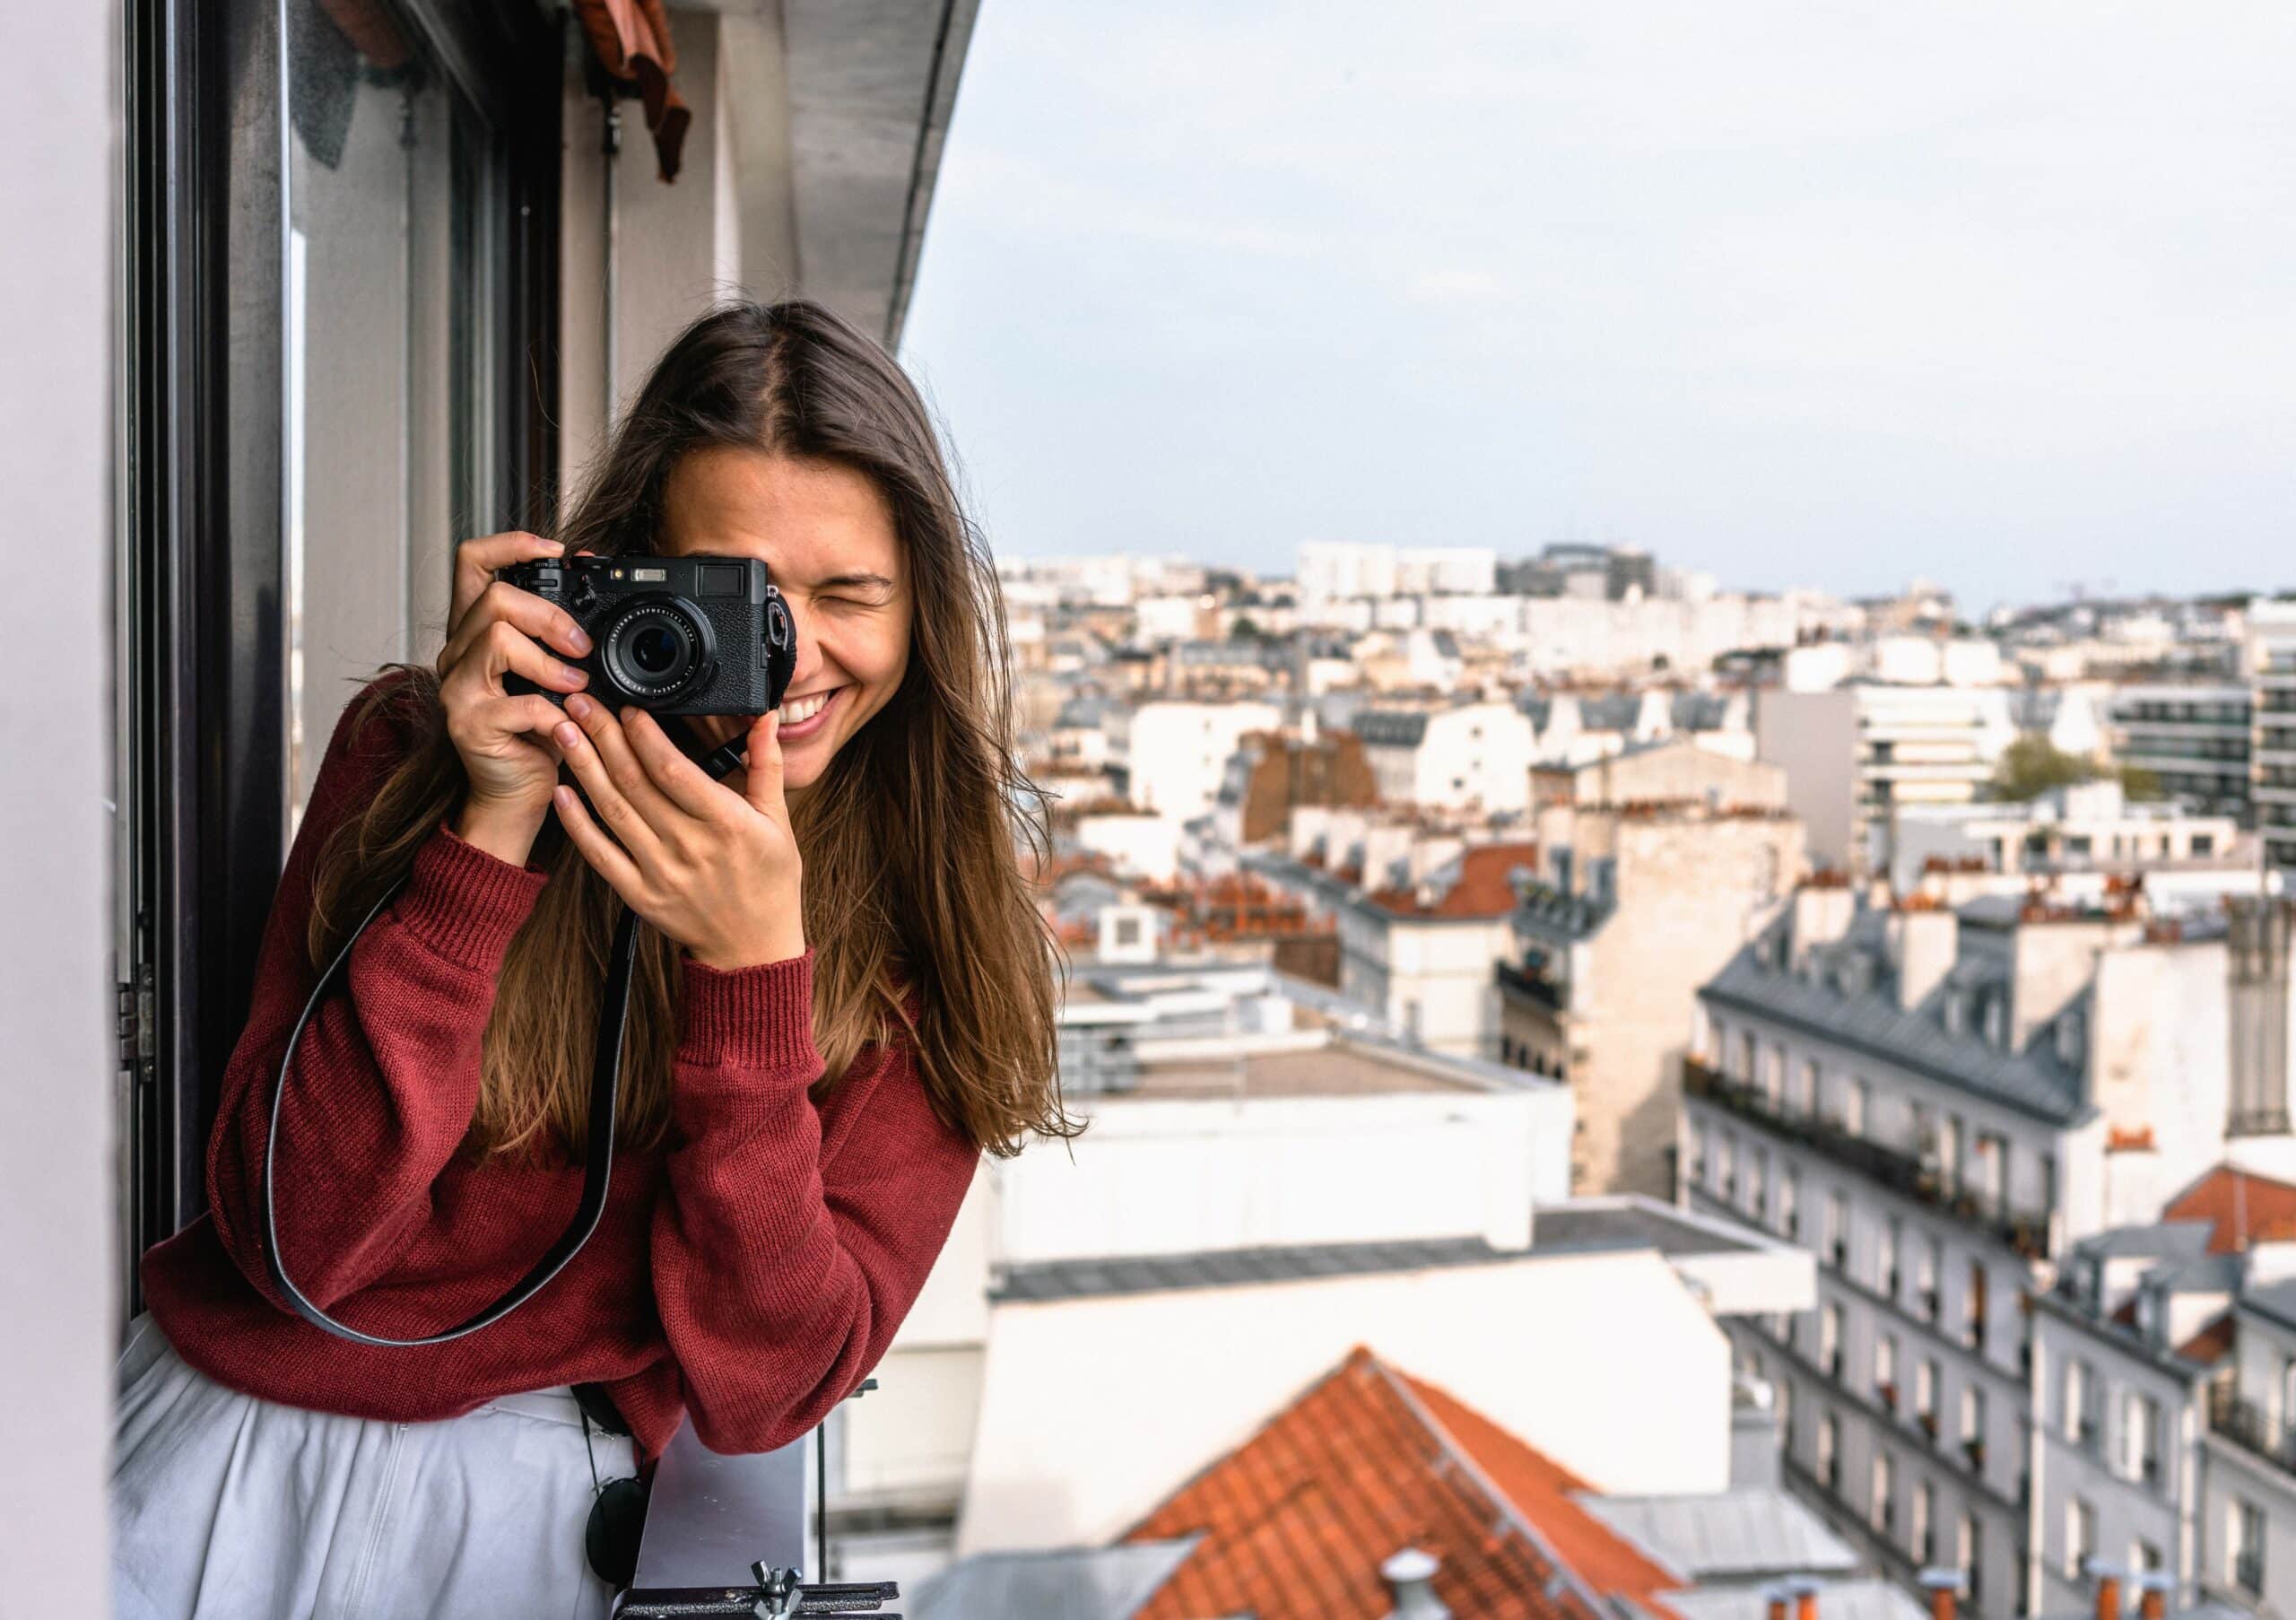 photographer jobs for introverts